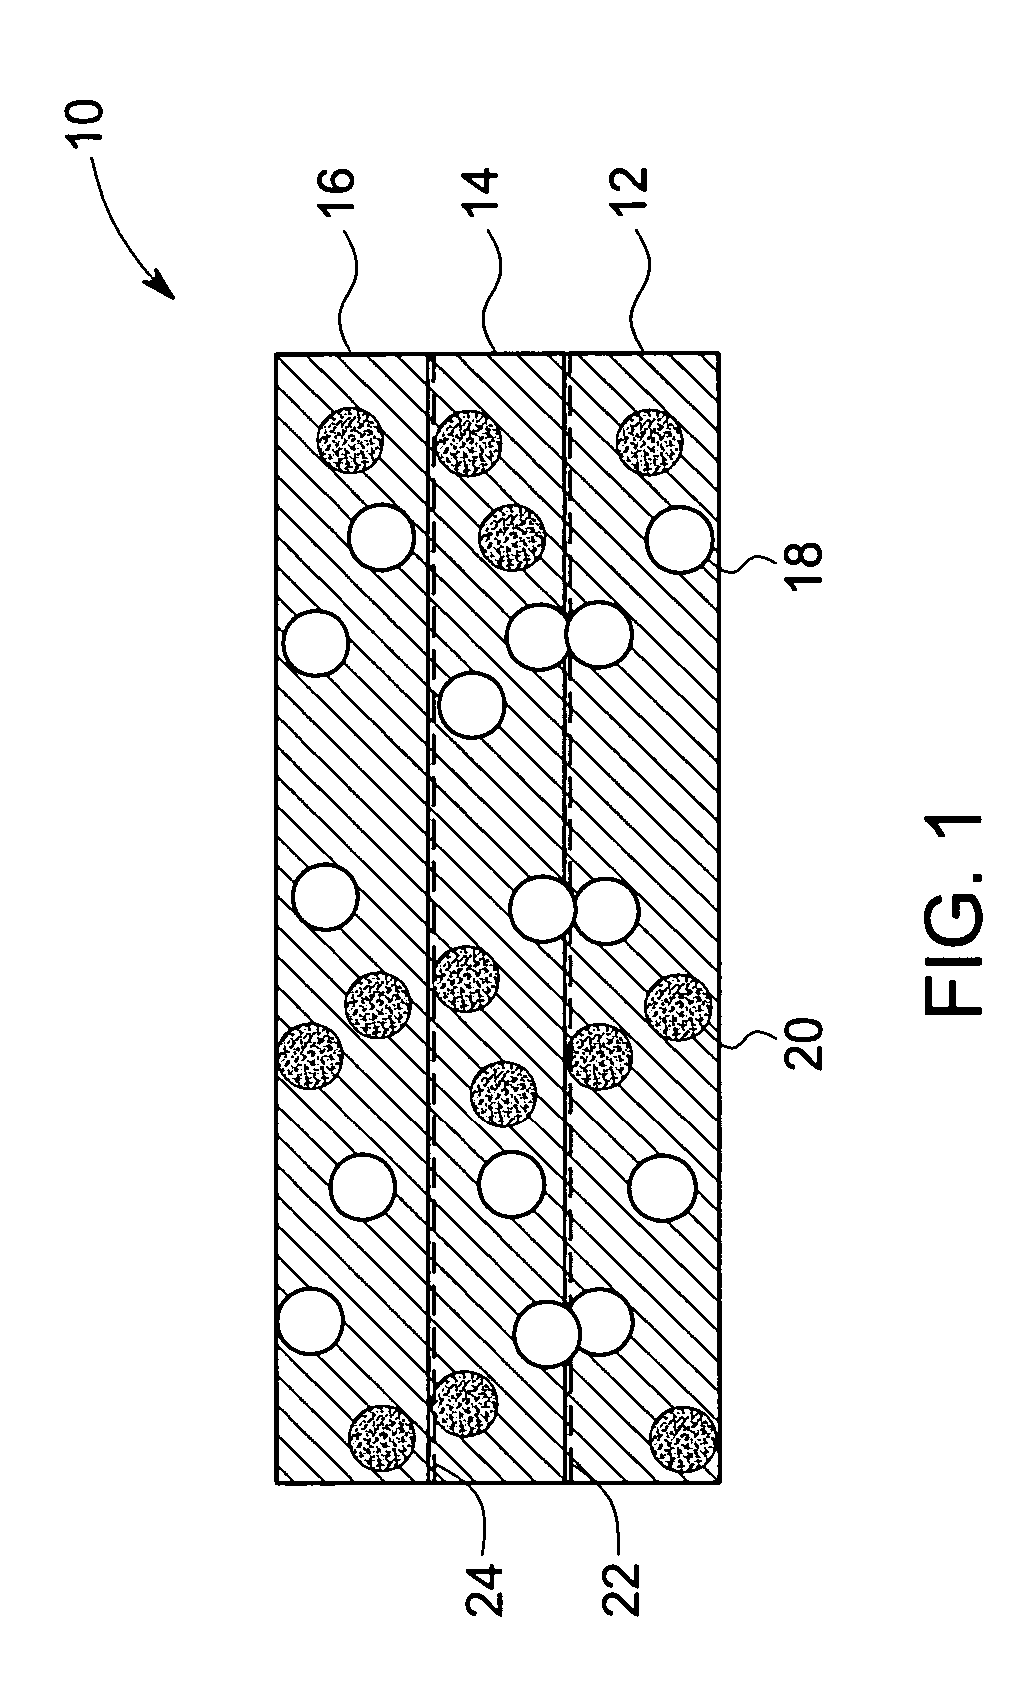 Dual cure resin composite system and method of manufacturing the same